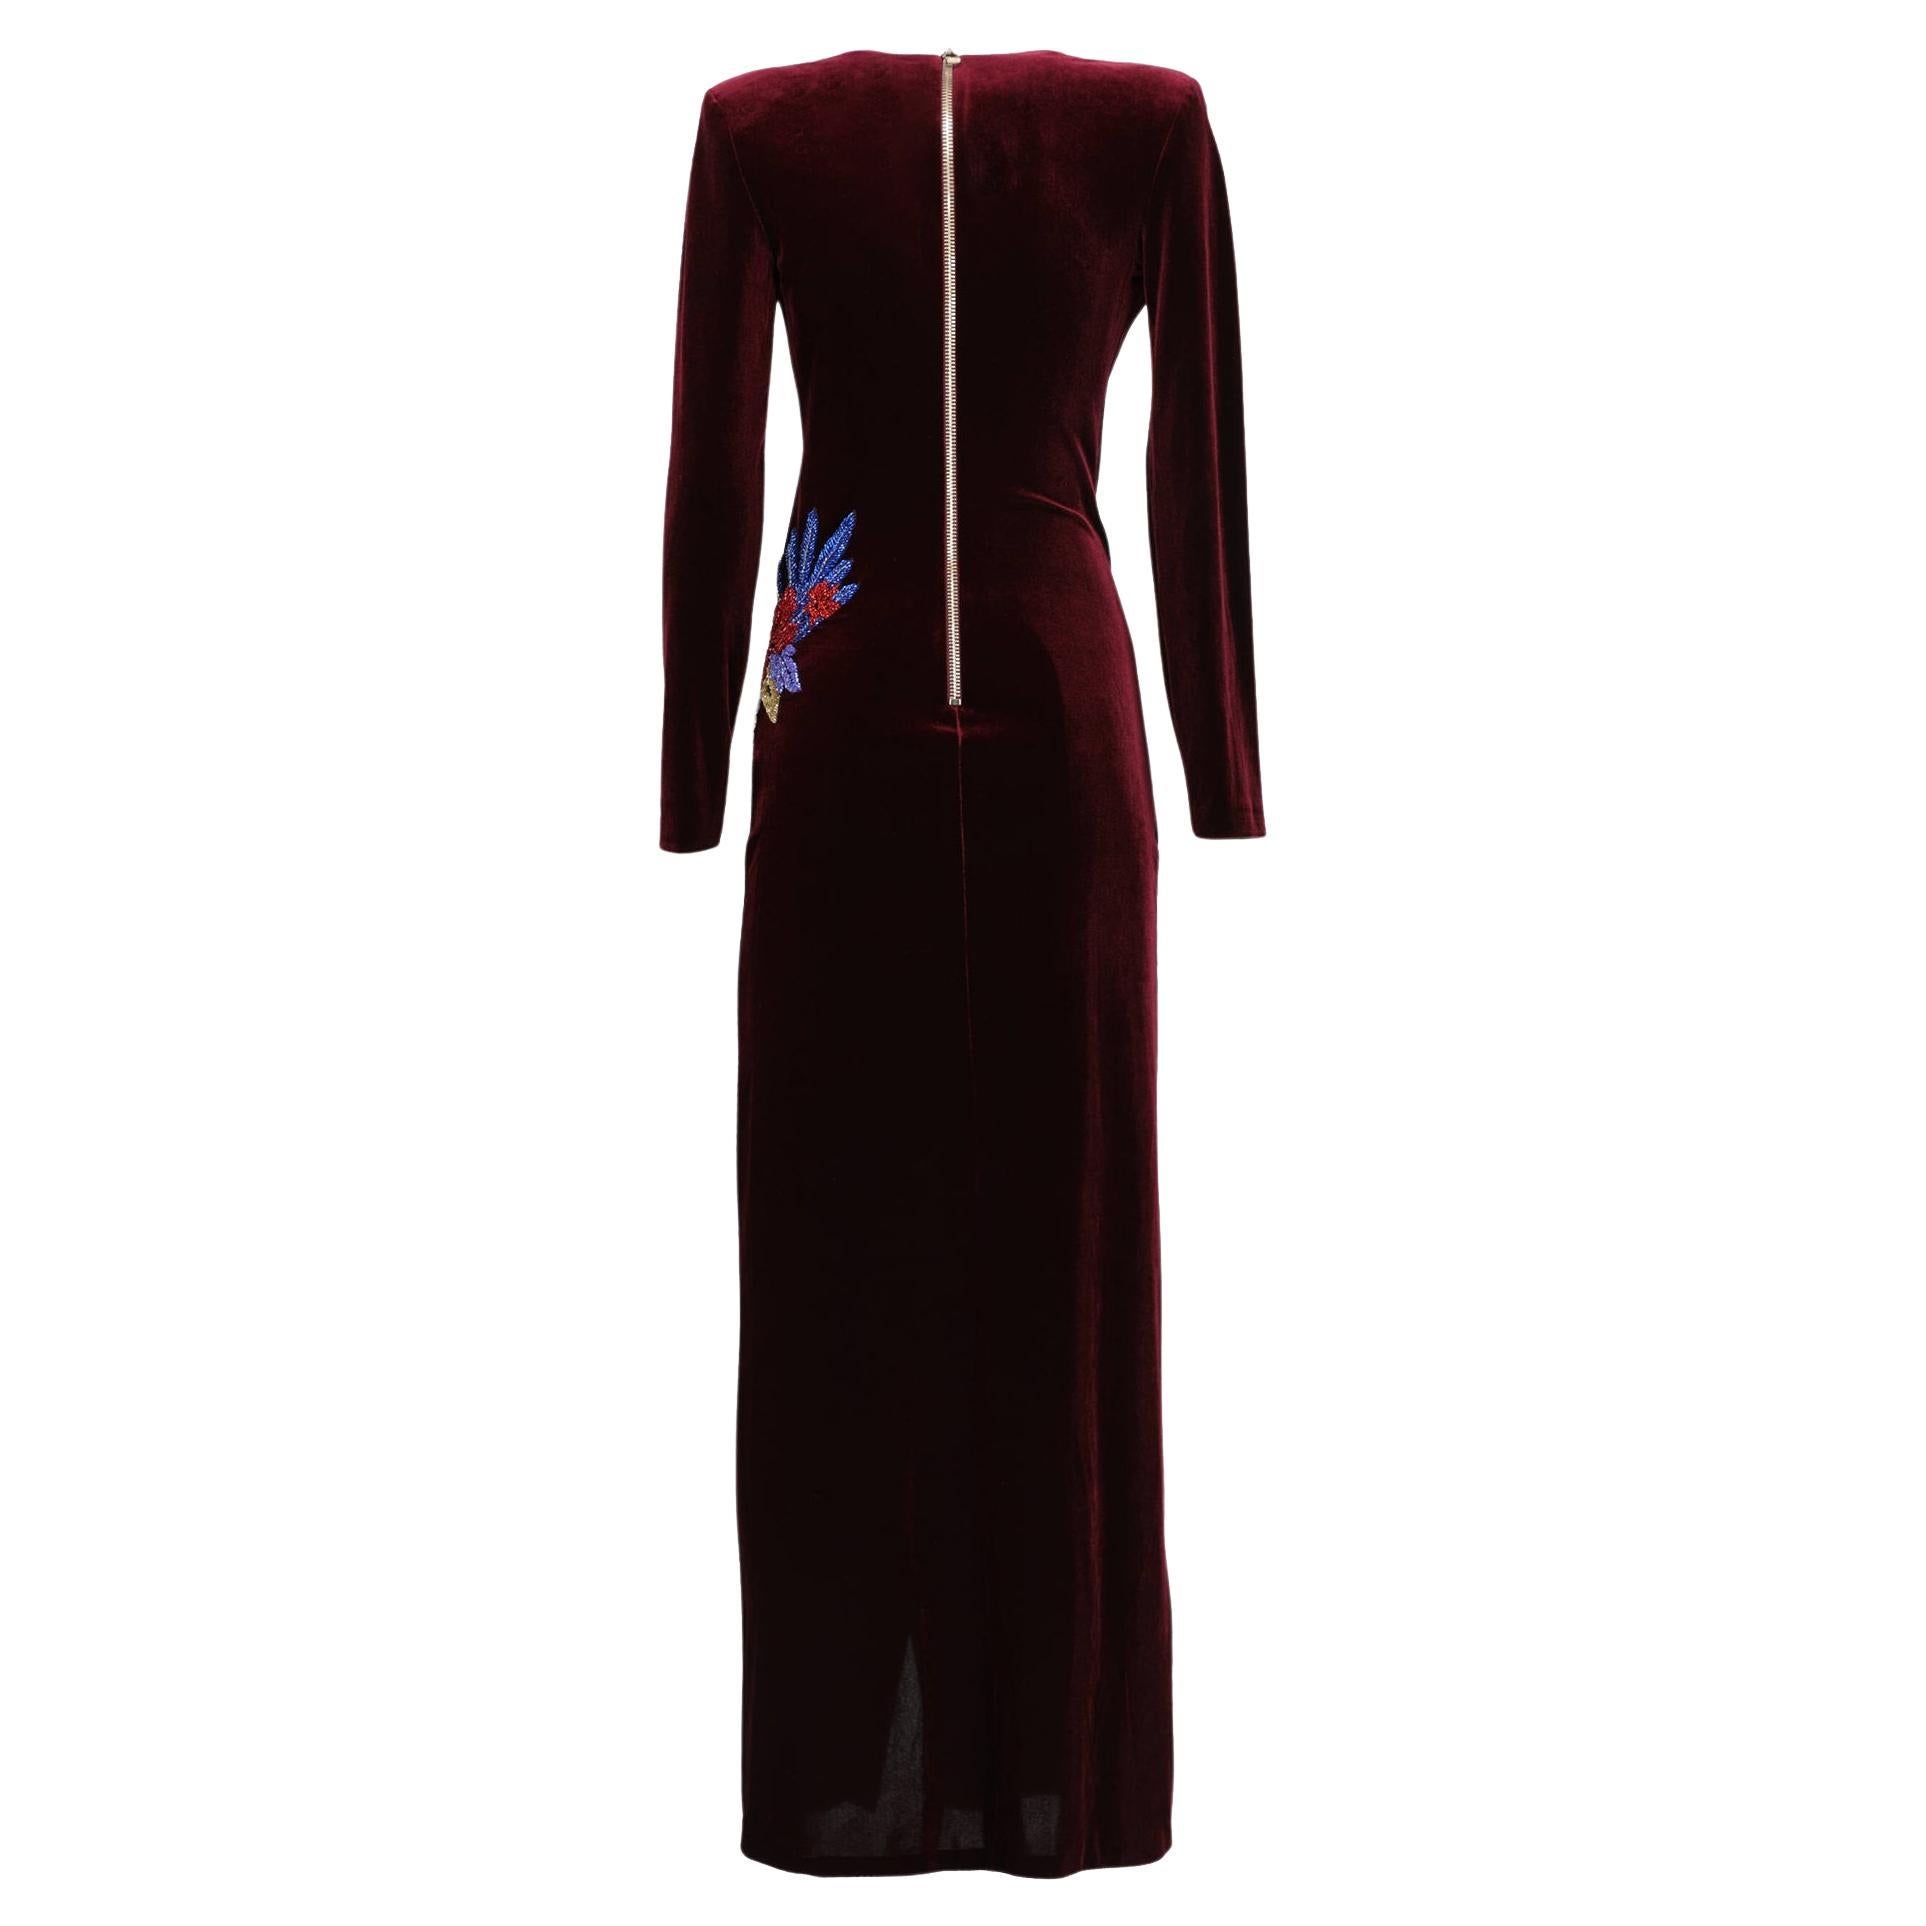 Balmain velvet wrap gown in burgundy.
Polyester (92%) and elastane (8%). 
With shoulder pads, long sleeves, beads embroidery on the side of the waist, and high slit in the front side. Closes with gold-tone button on the back.

Total length 149